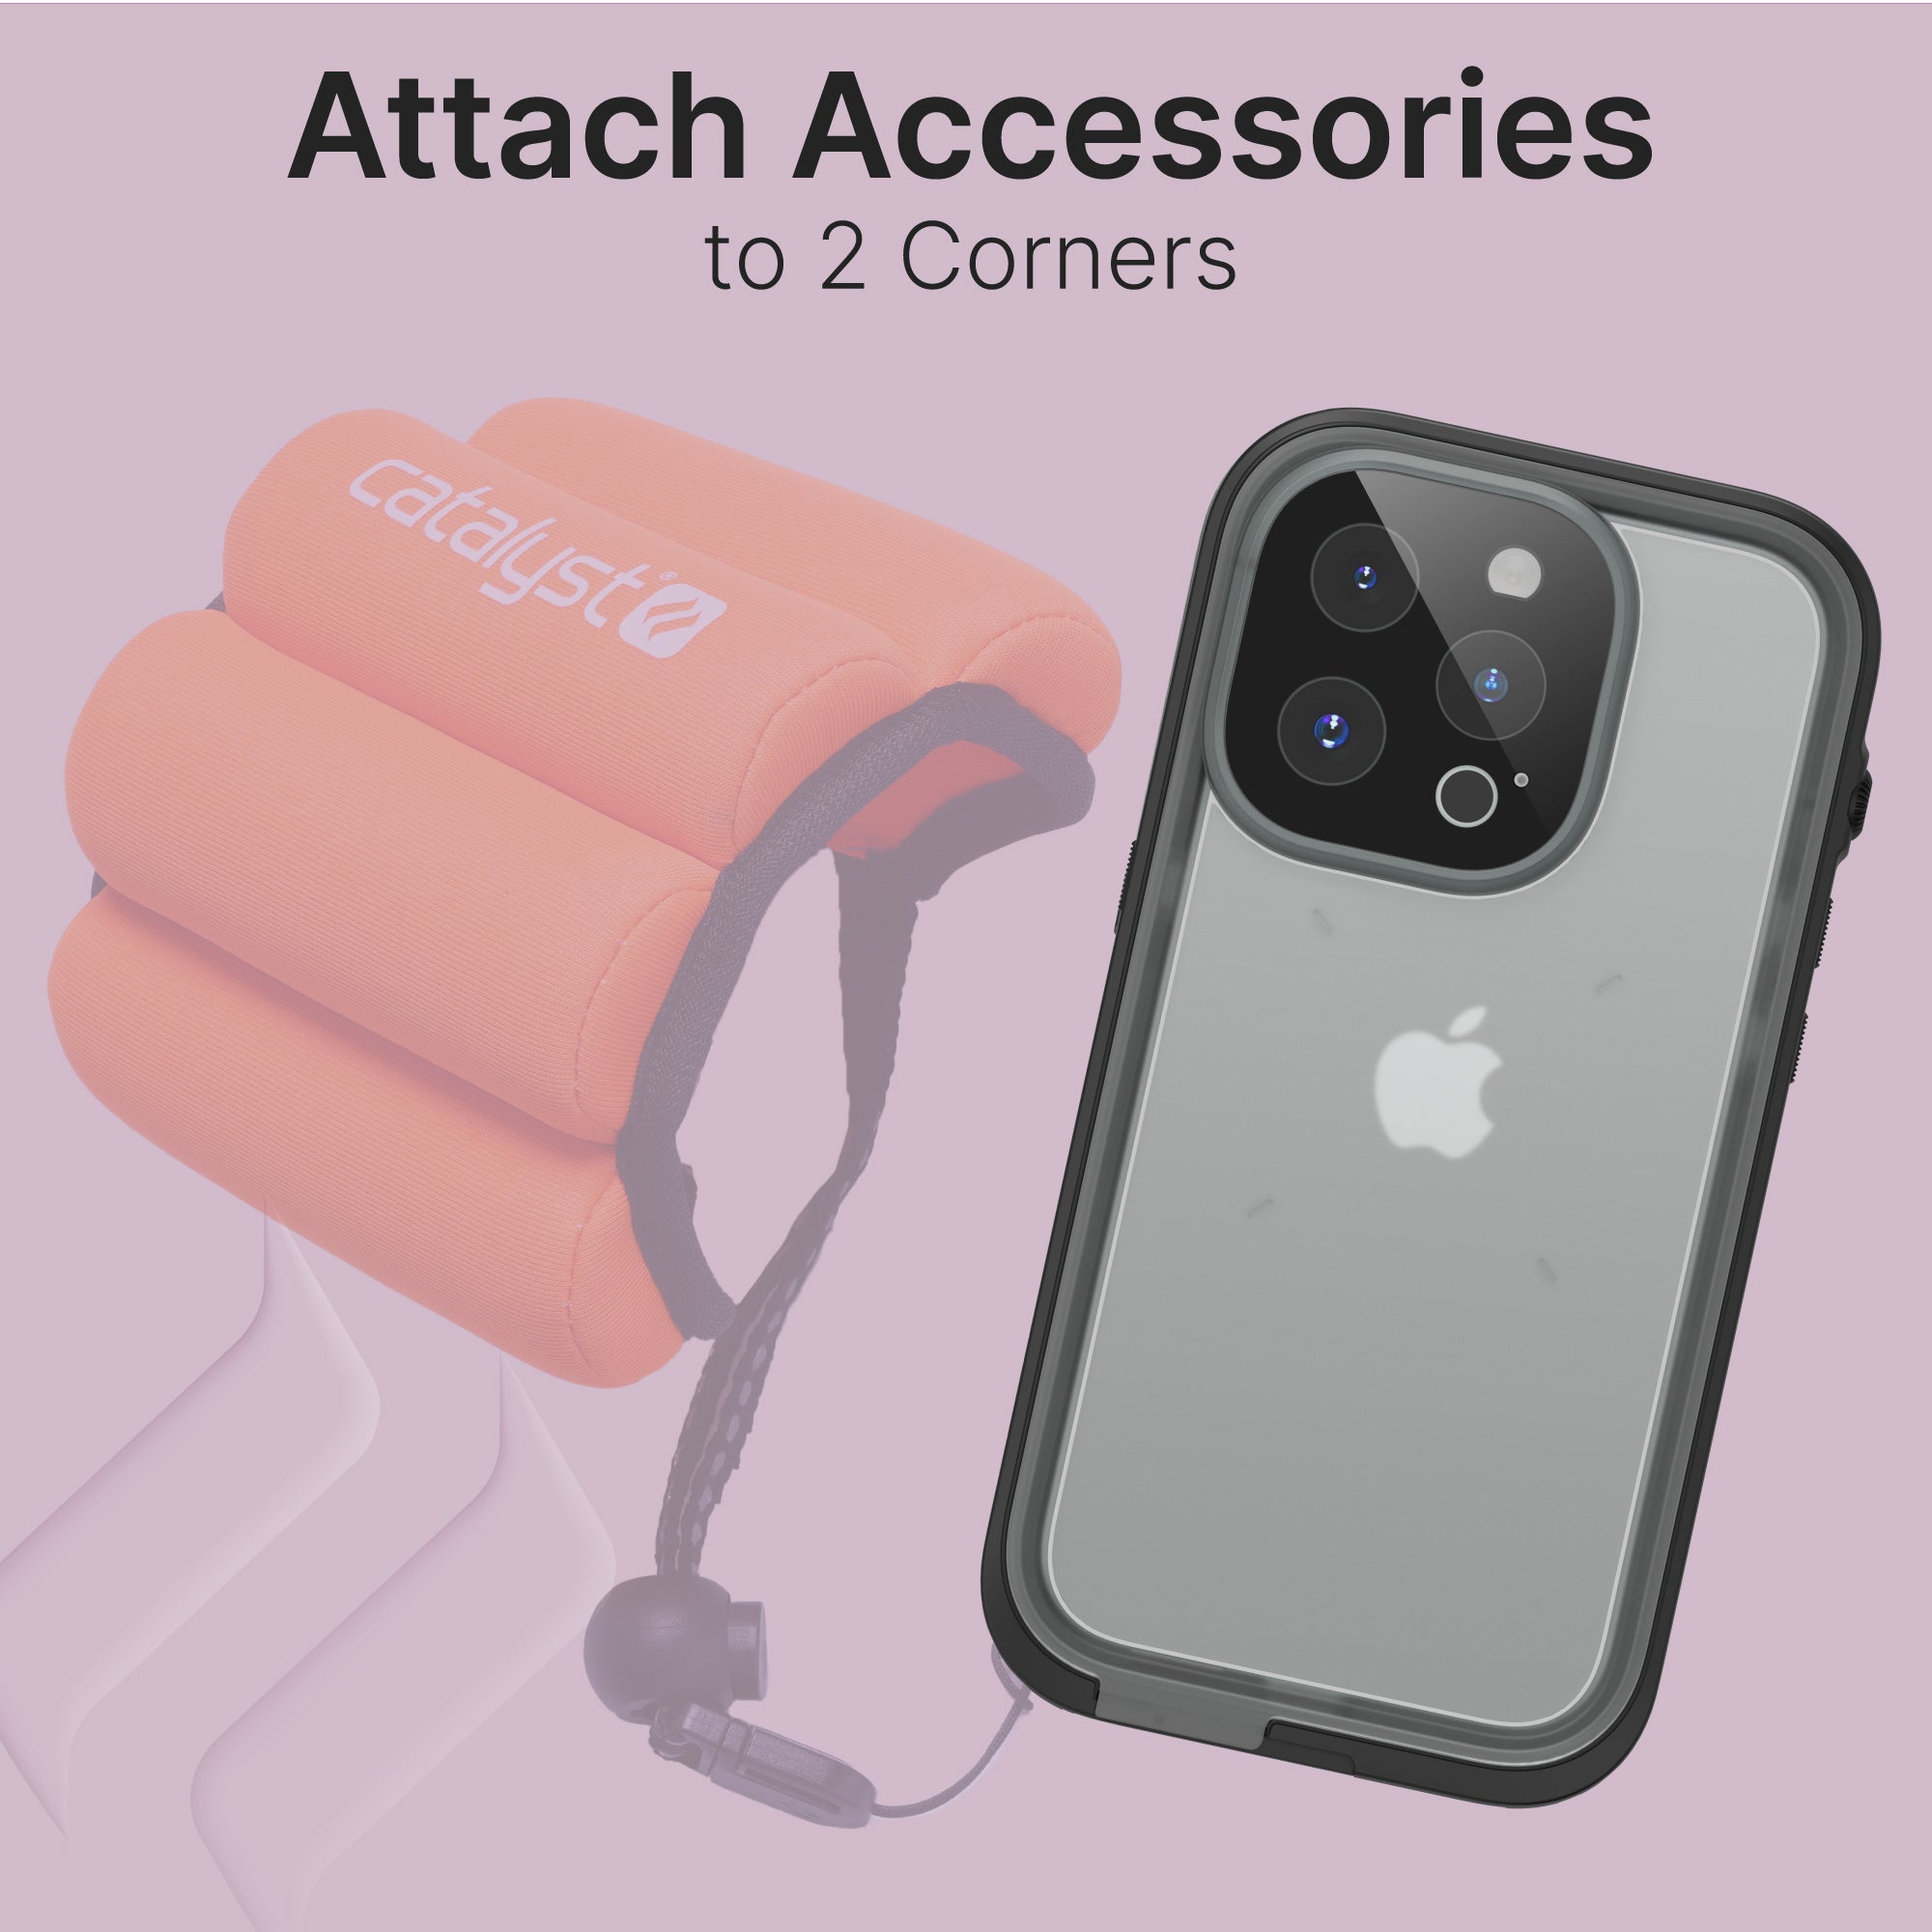 CATIPHO14BLKMP-FBA | Catalyst iPhone 14 Pro Waterproof Case Total Protection Floating Wrist Lanyard attached to one of the 2 corners of case